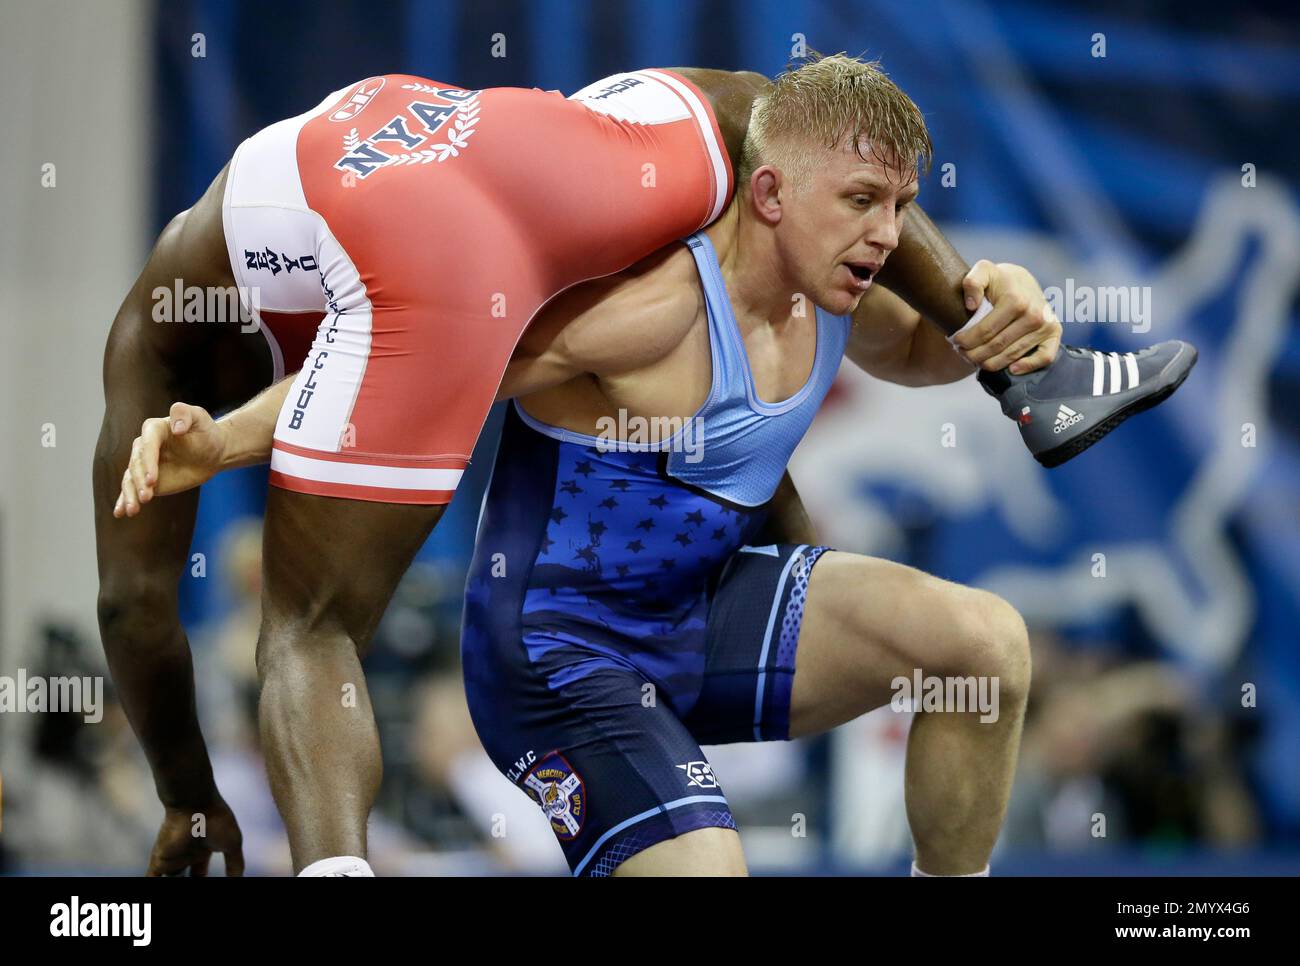 Kyle Dake, right, takes Richard Perry to the mat during their 86-kilogram freestyle match at the U.S